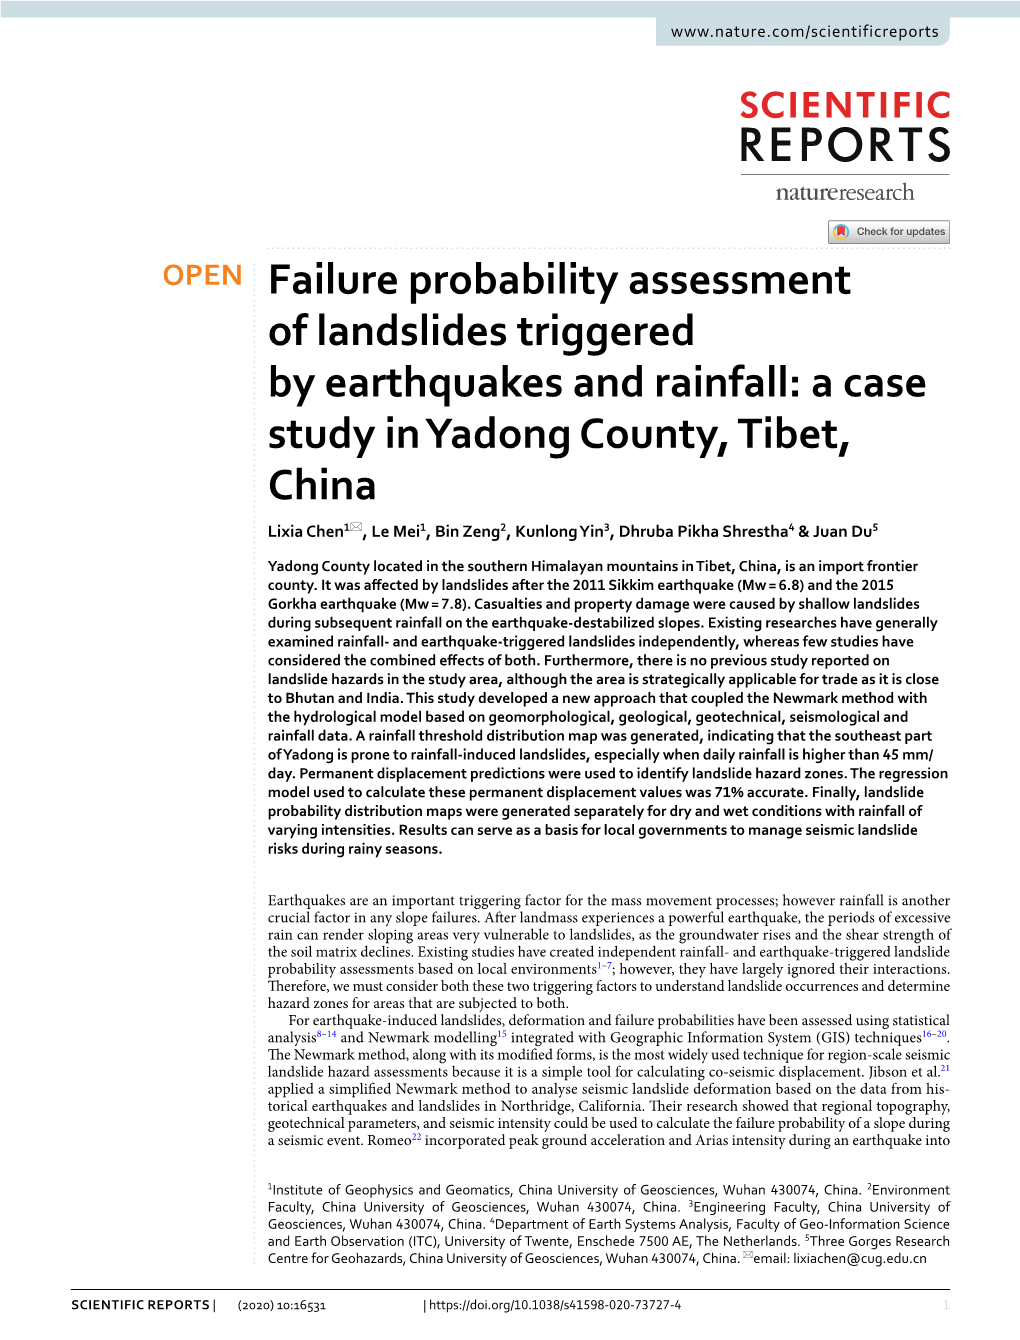 Failure Probability Assessment of Landslides Triggered by Earthquakes